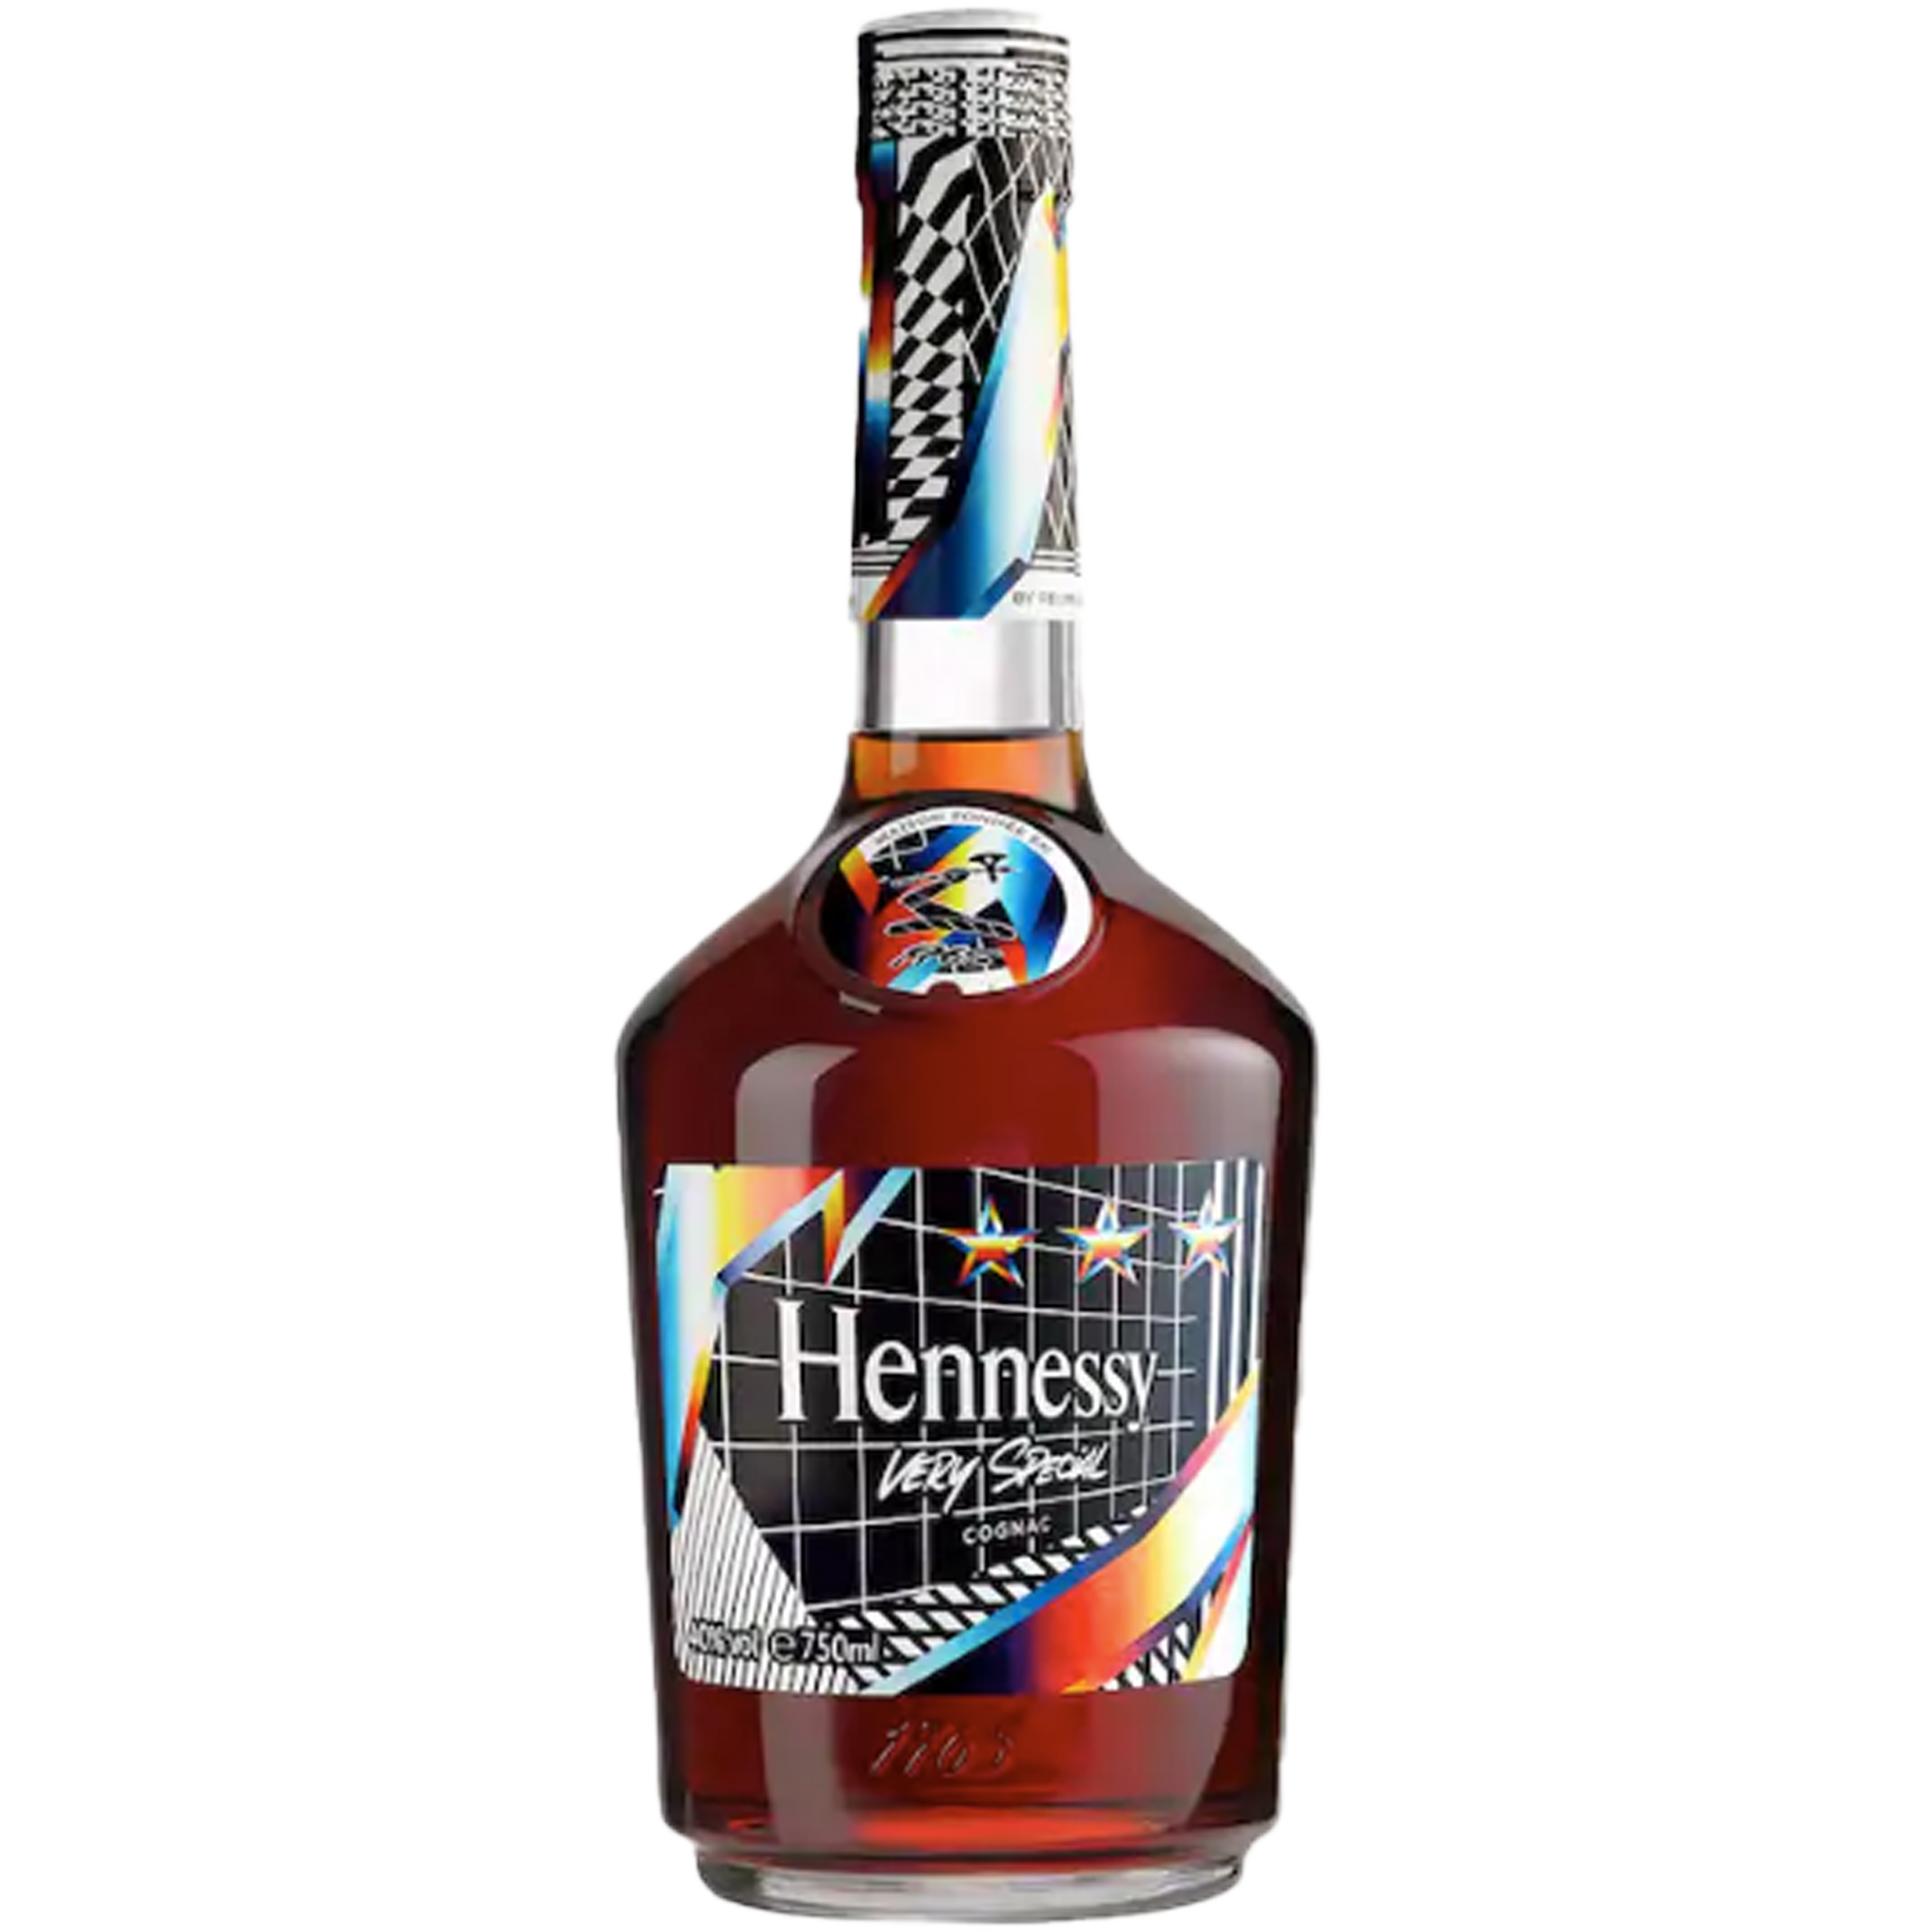 Hennessy Very Special/ Maison Fondee  Limited Edition